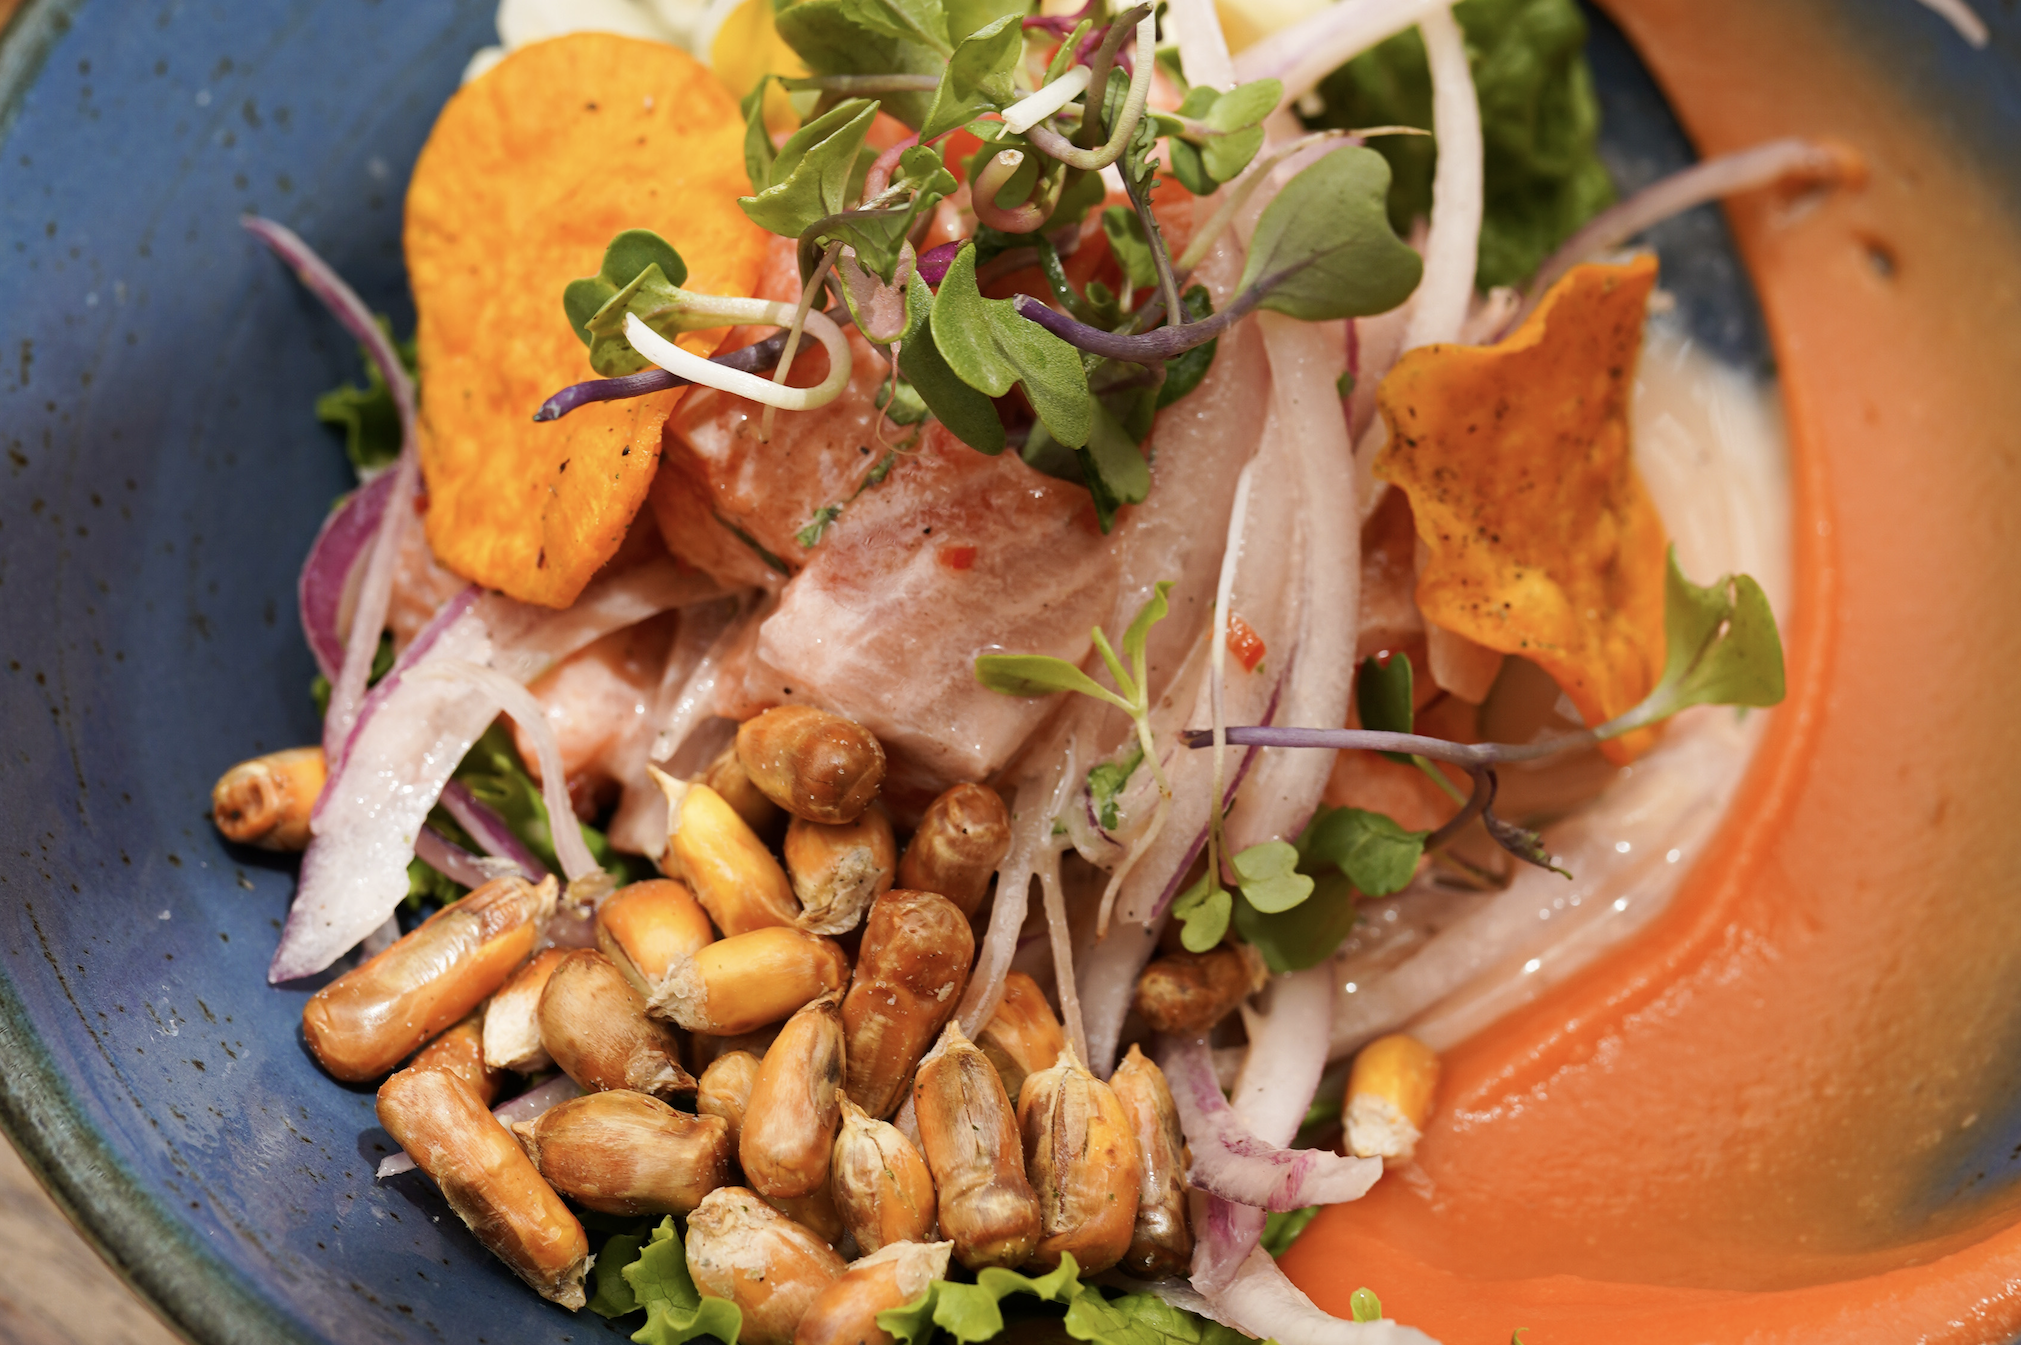 Las Qolqas ceviche is somewhat atypical of what is offered in most cevicherias in Peru